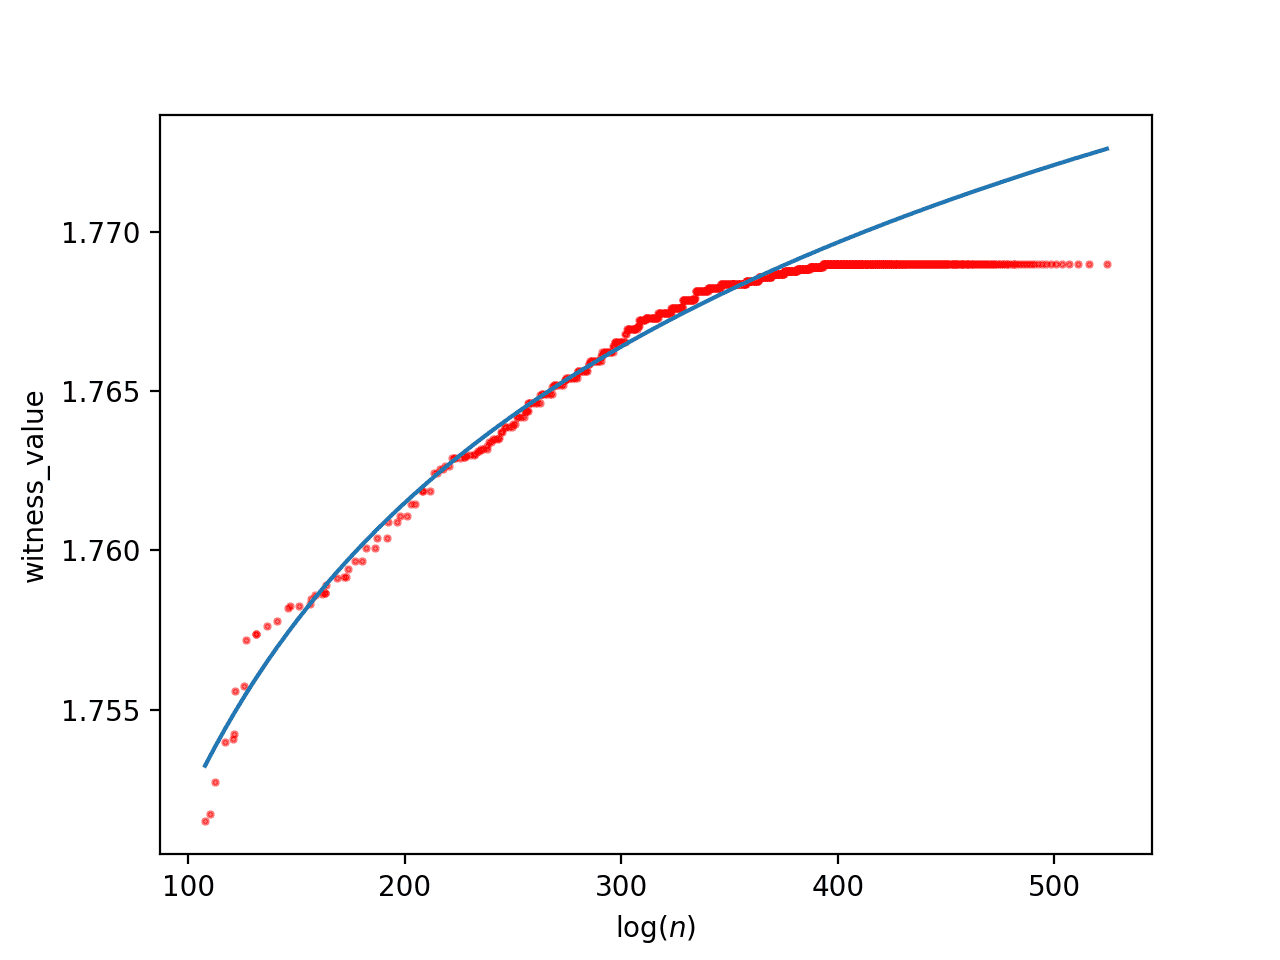 The fit of the large database to a + b log log x. If this is accurate, we would find the counterexample around log(n) = 1359.